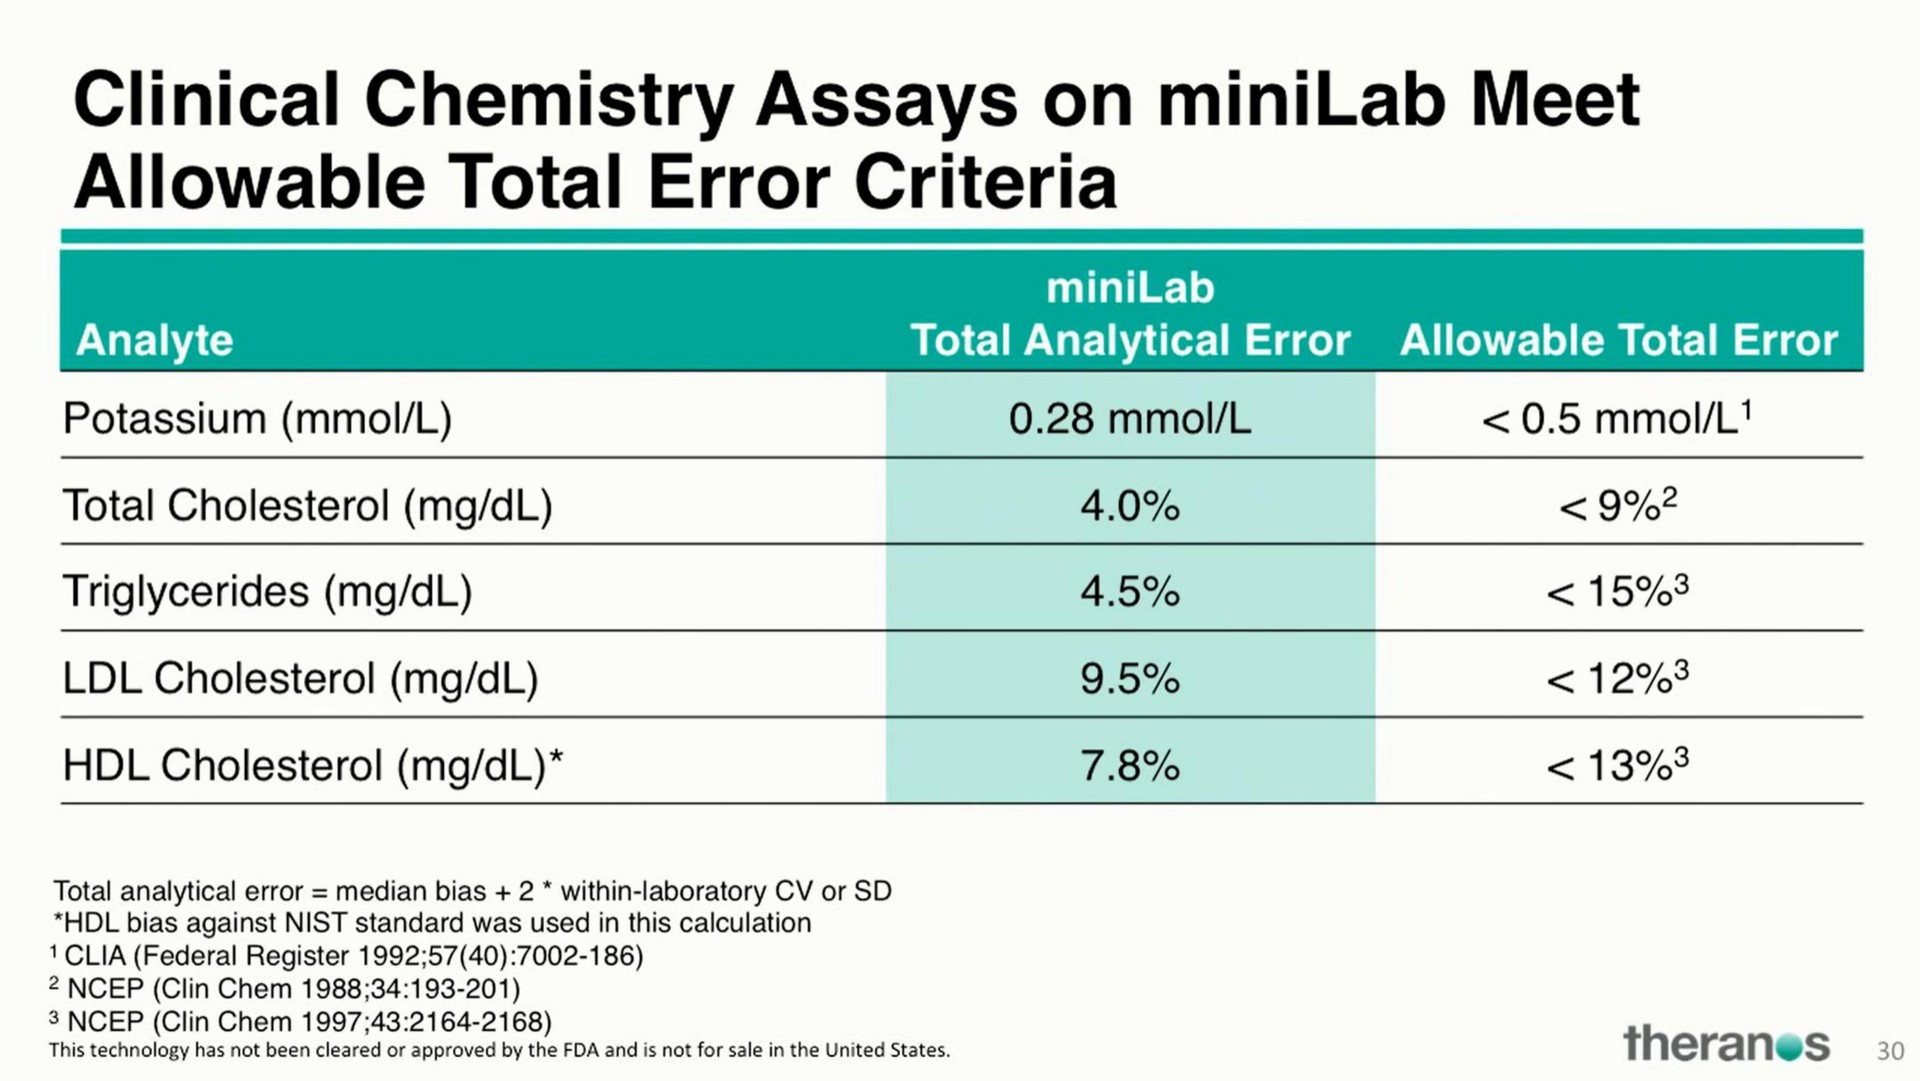 clinical chemistry assays on meet allowable total error criteria | Theranos